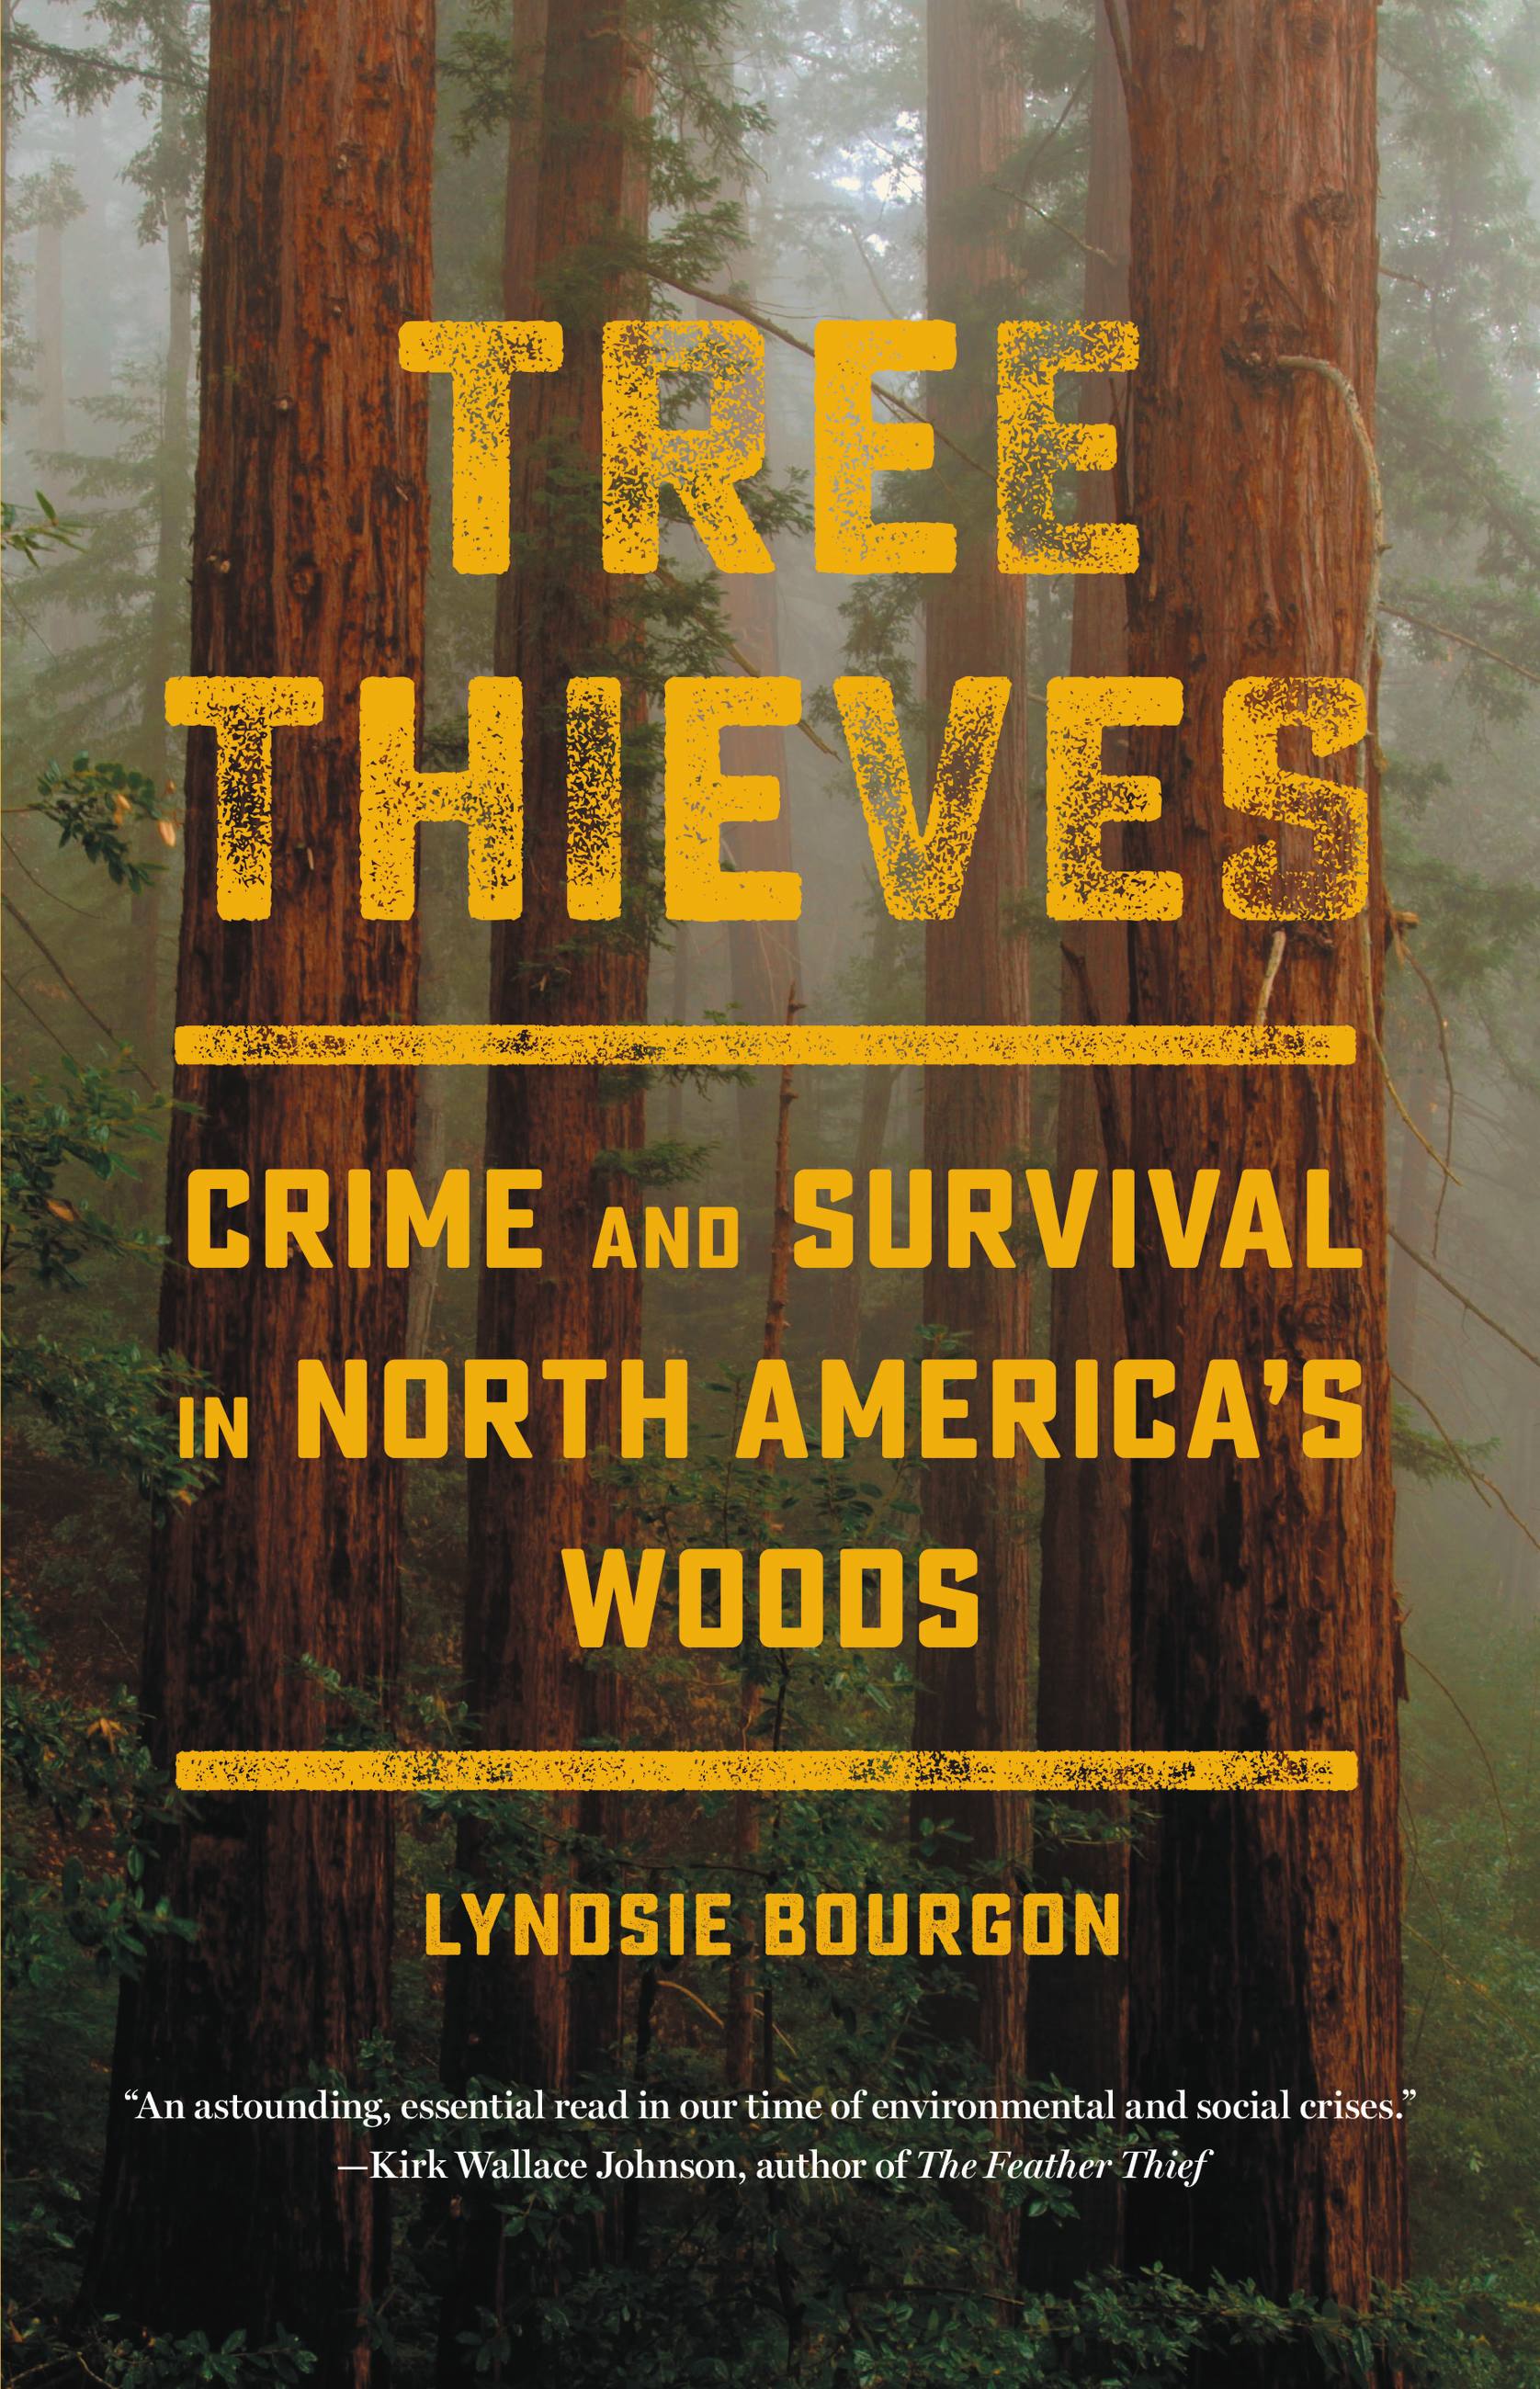 Tree Thieves Crime and Survival in North America's Woods